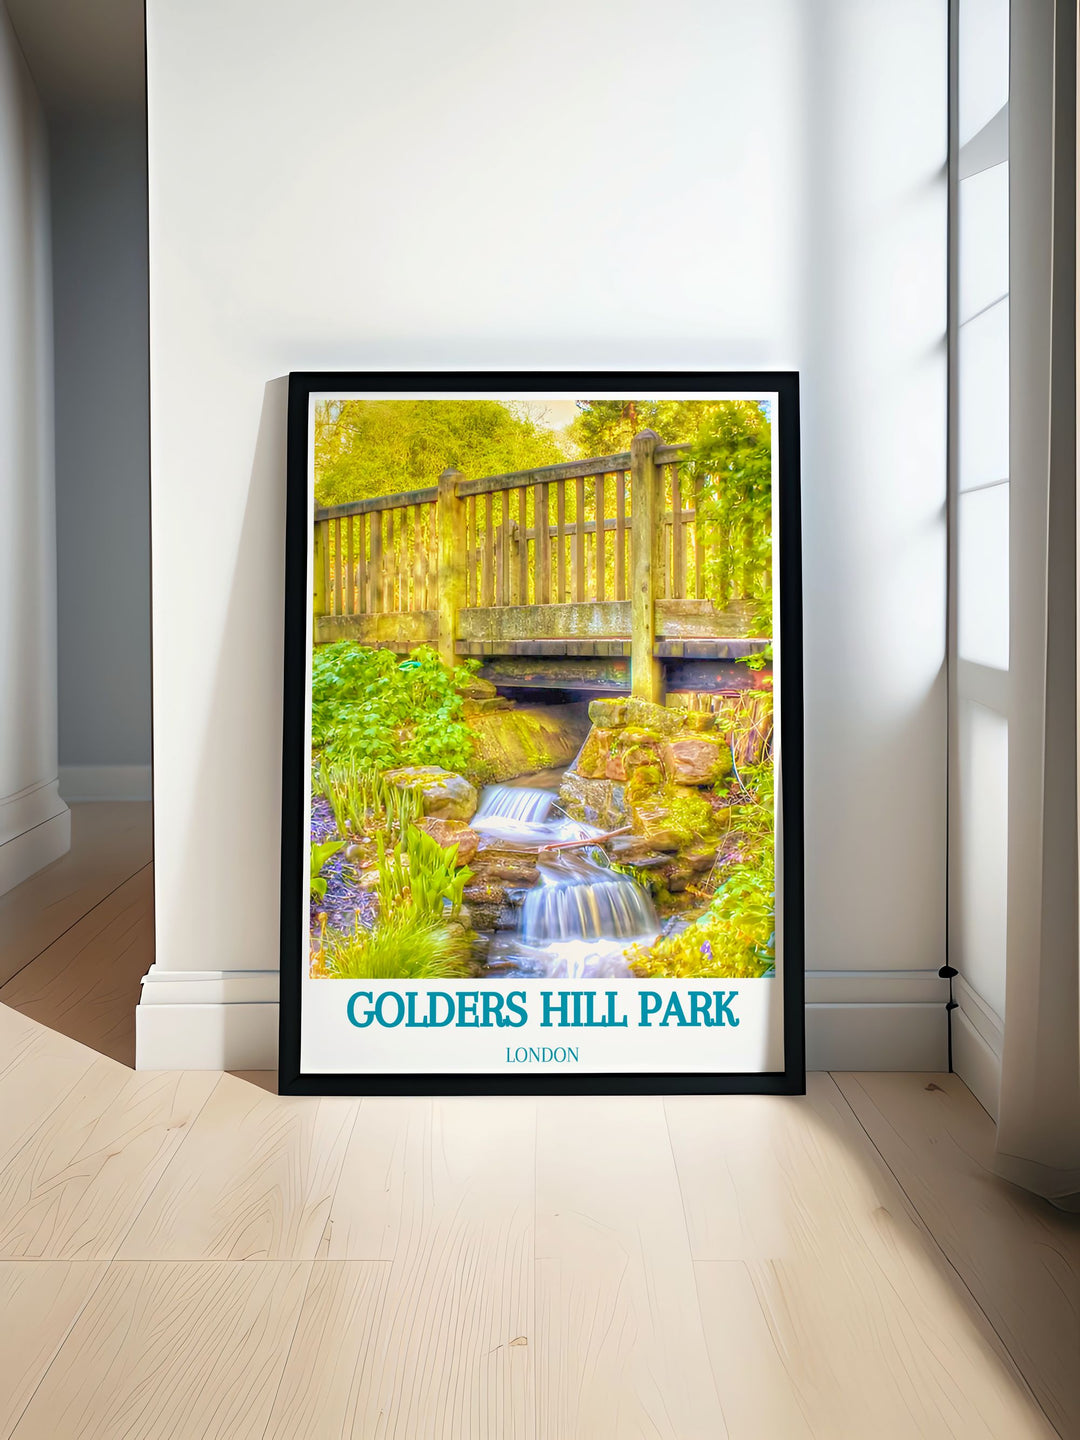 Modern wall decor featuring Golders Hill Park, with its vibrant natural scenery and serene Water Gardens, ideal for contemporary home settings.